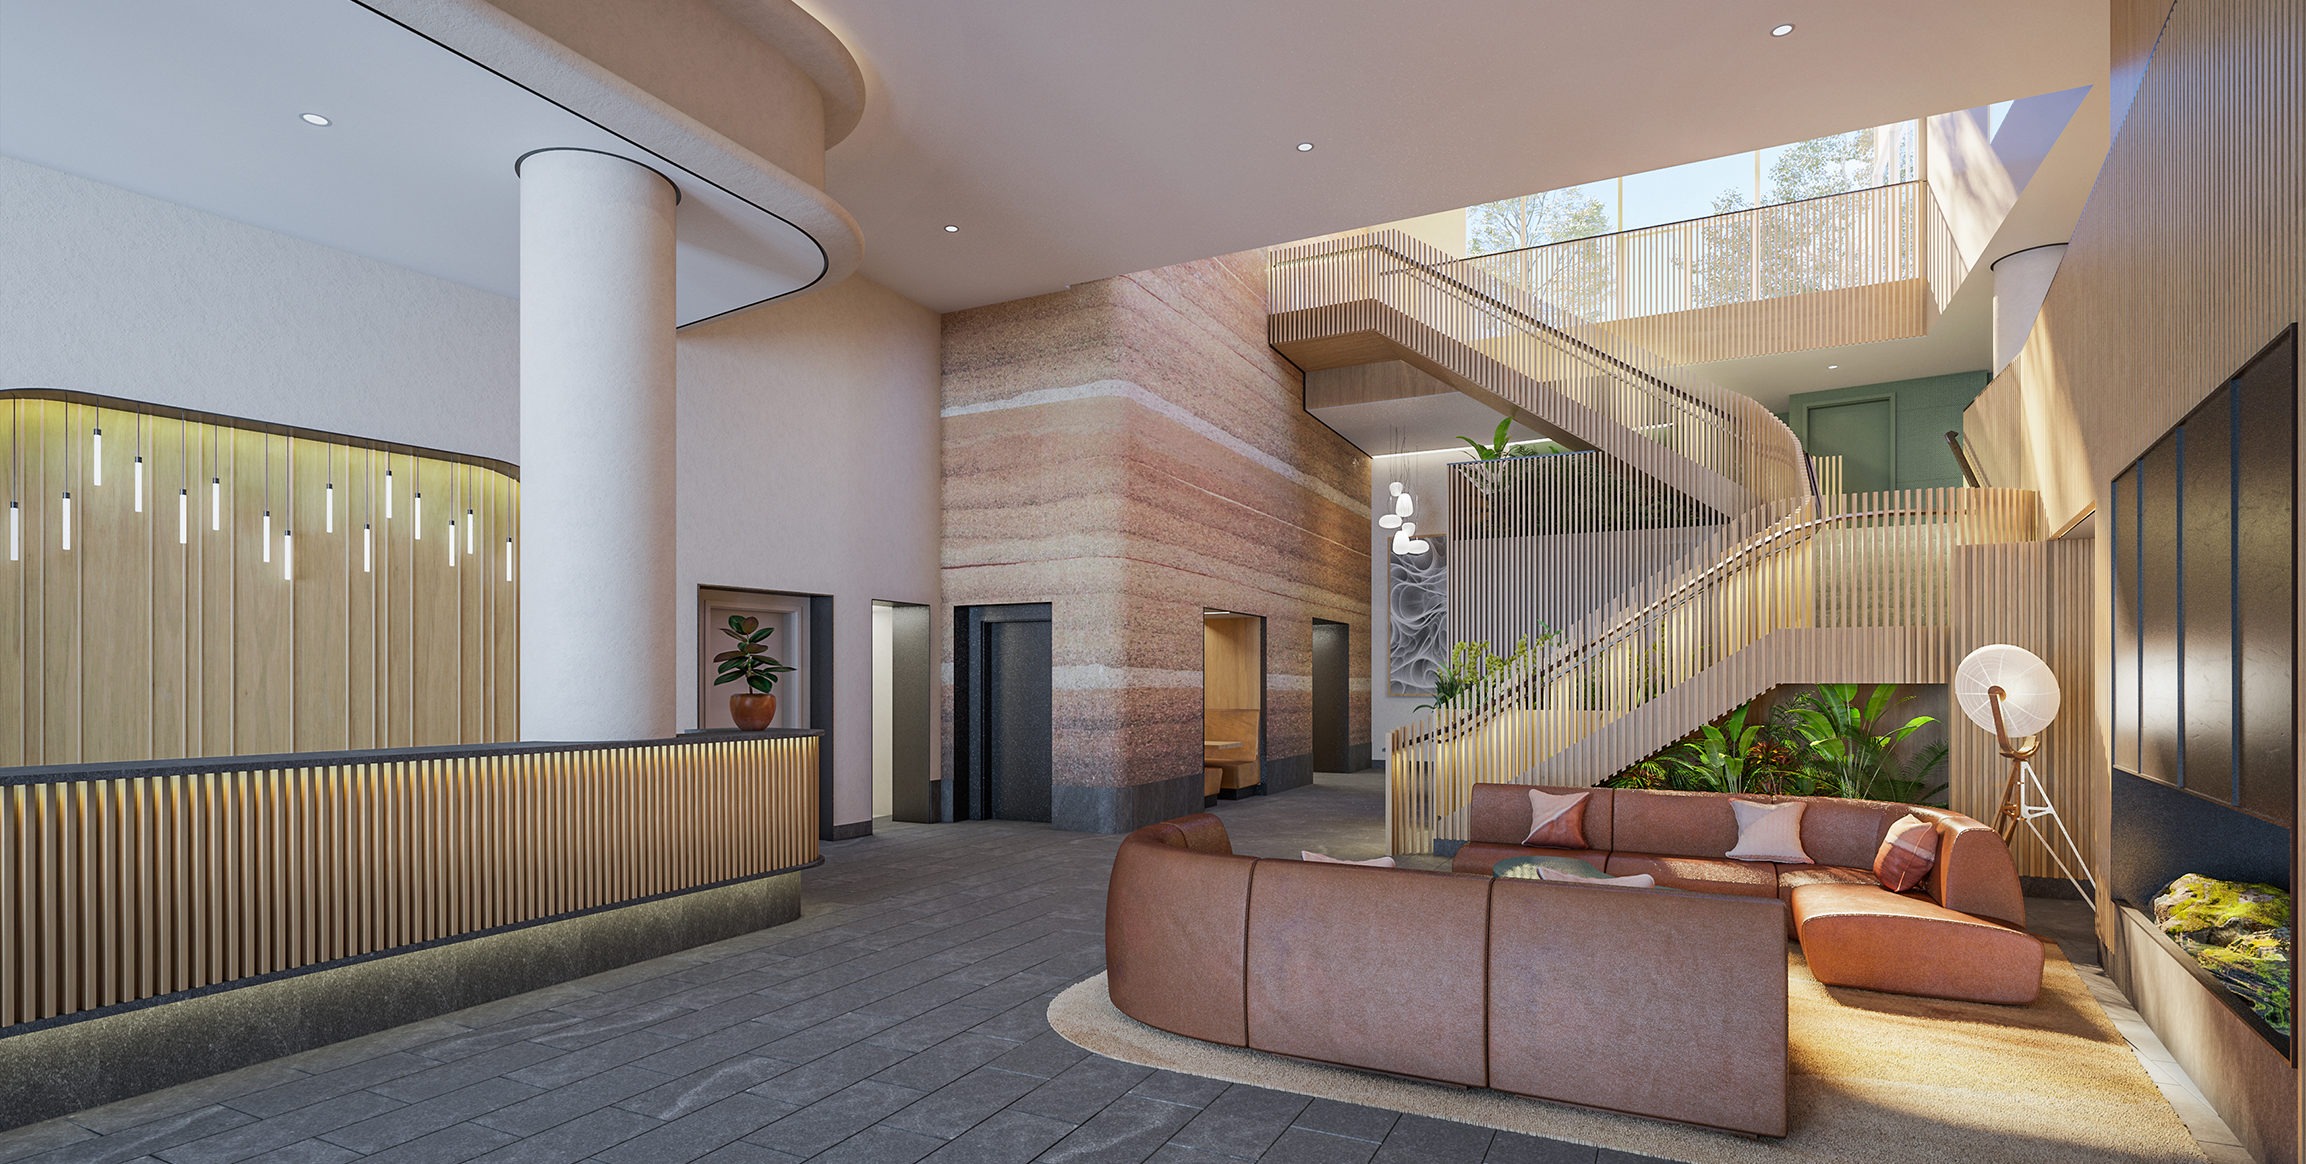 South Tower residential lobby image with seating arrangement and feature stair to the second floor amenities.